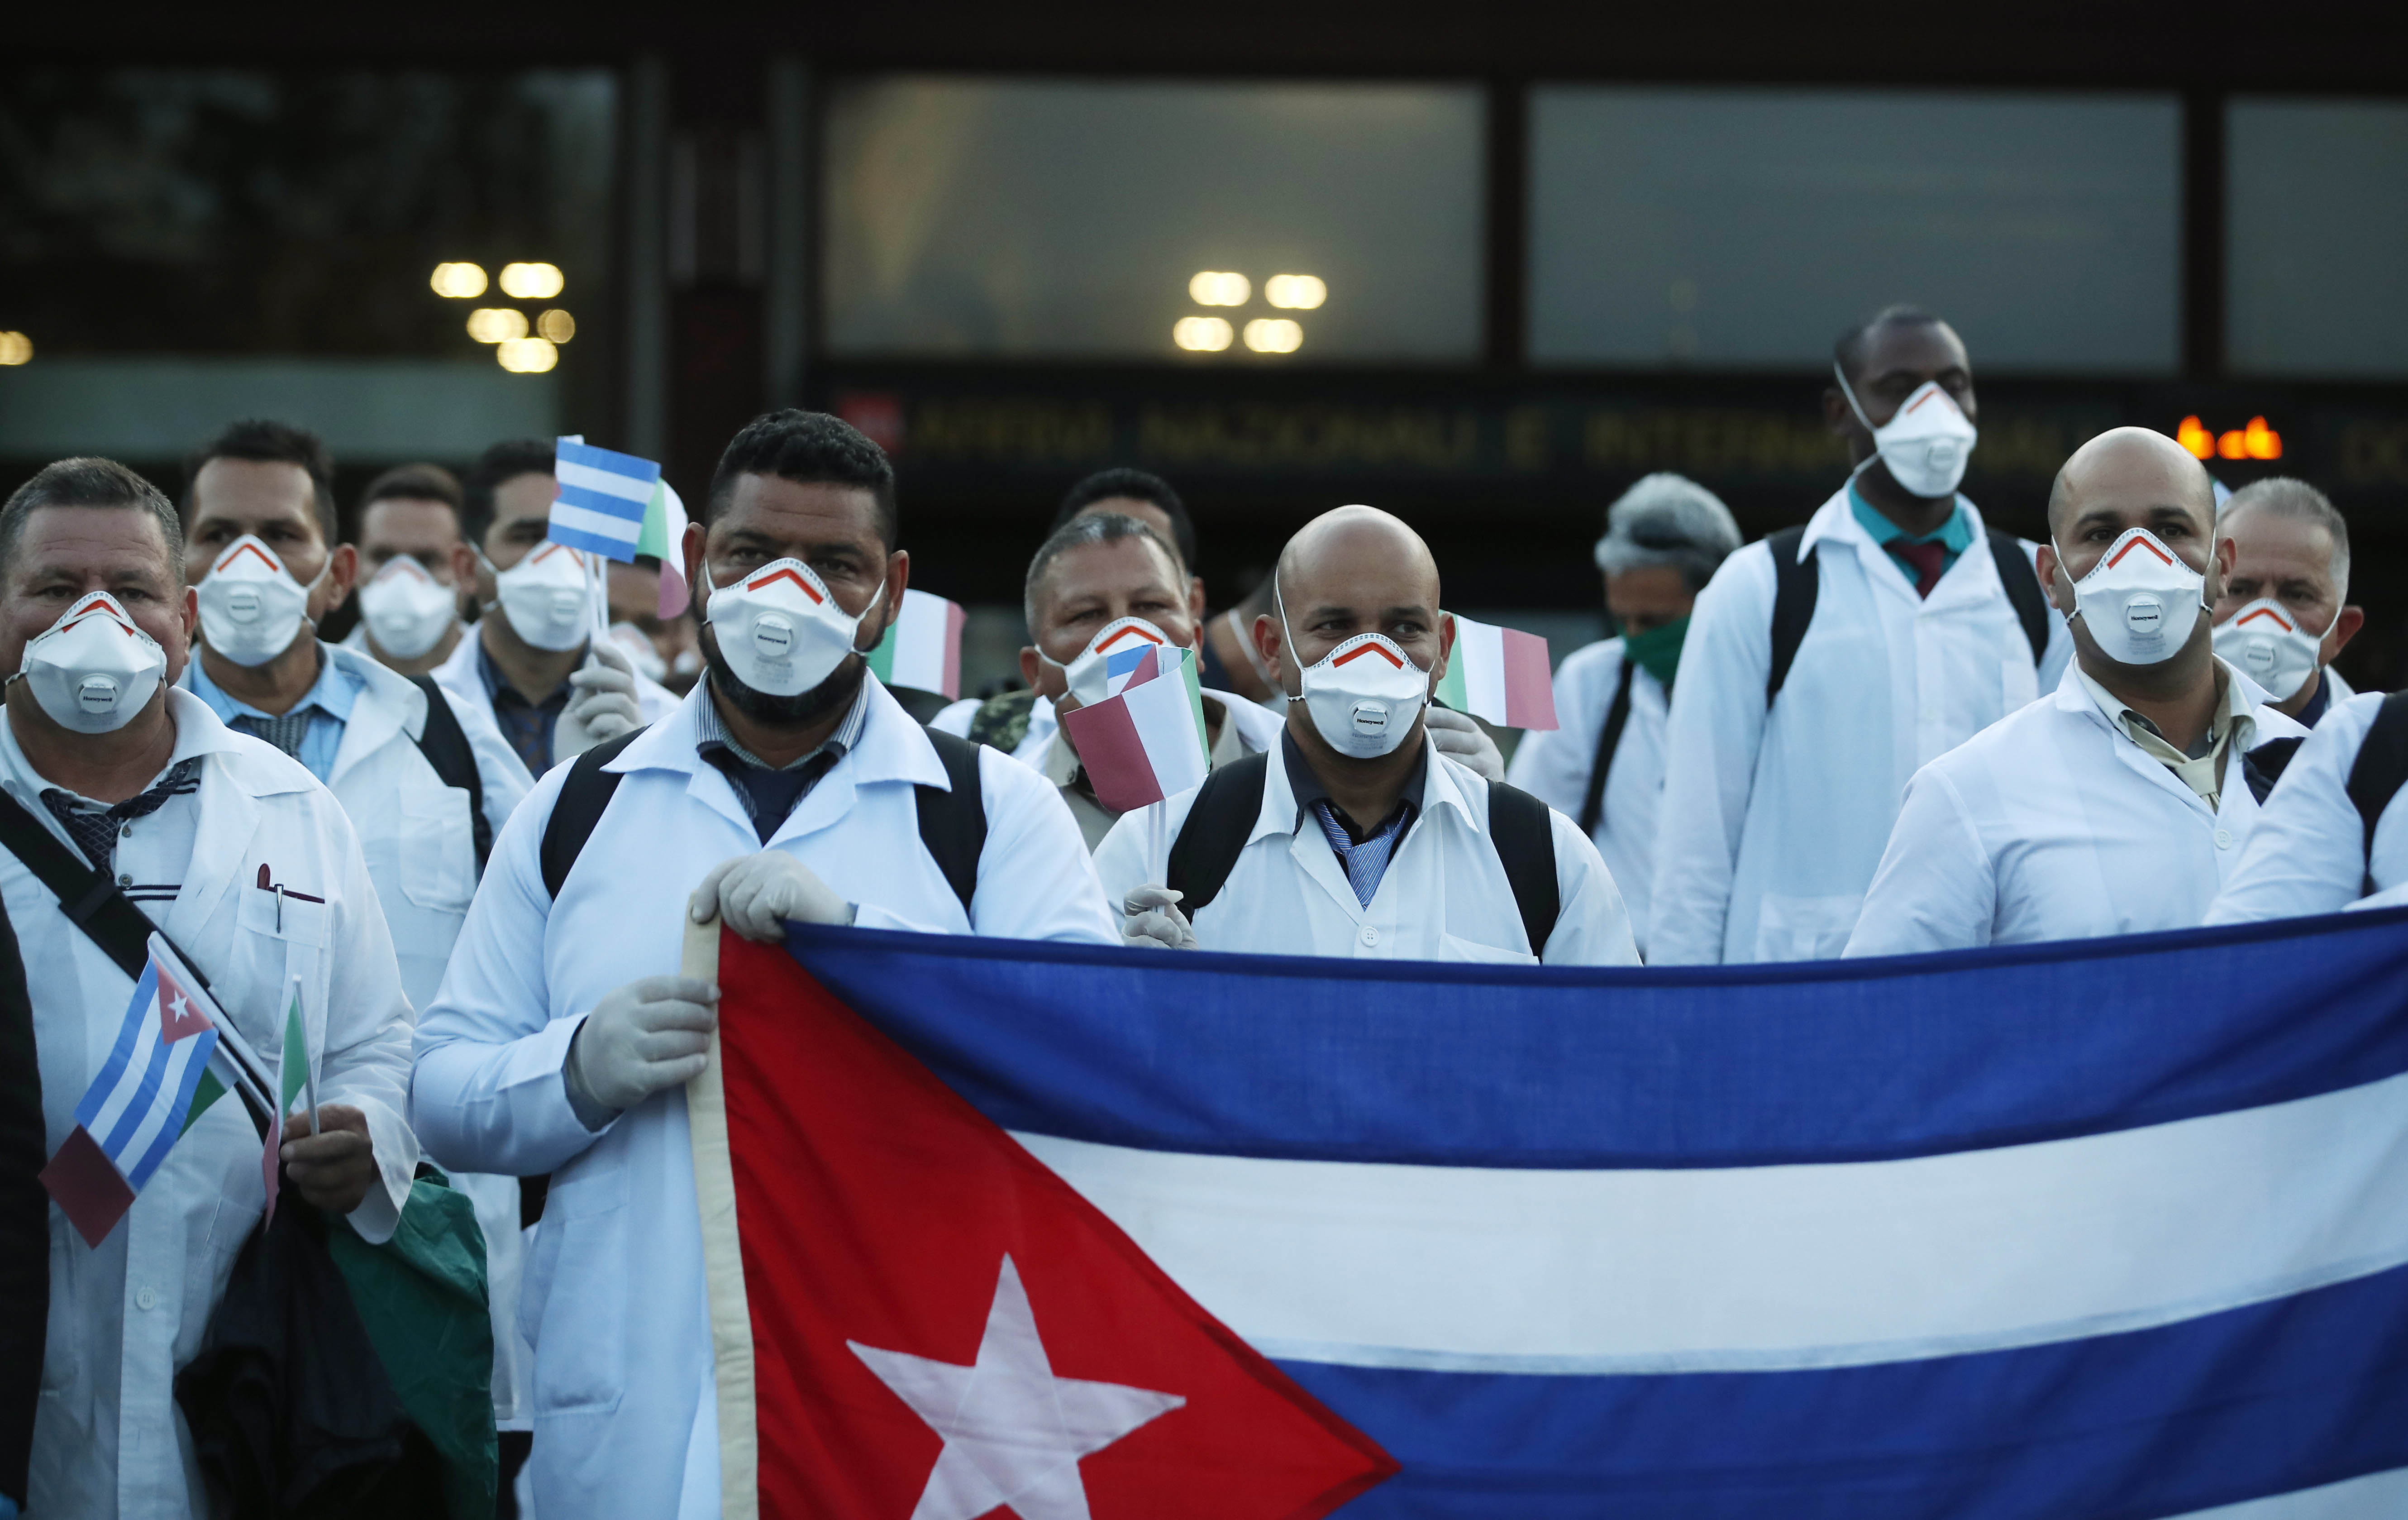 Medics and paramedics from Cuba pose upon arrival at the Malpensa airport of Milan, Italy, Sunday, March 22, 2020. Fifty-three doctors and paramedics from Cuba arrived in Milan to help with coronavirus treatment.